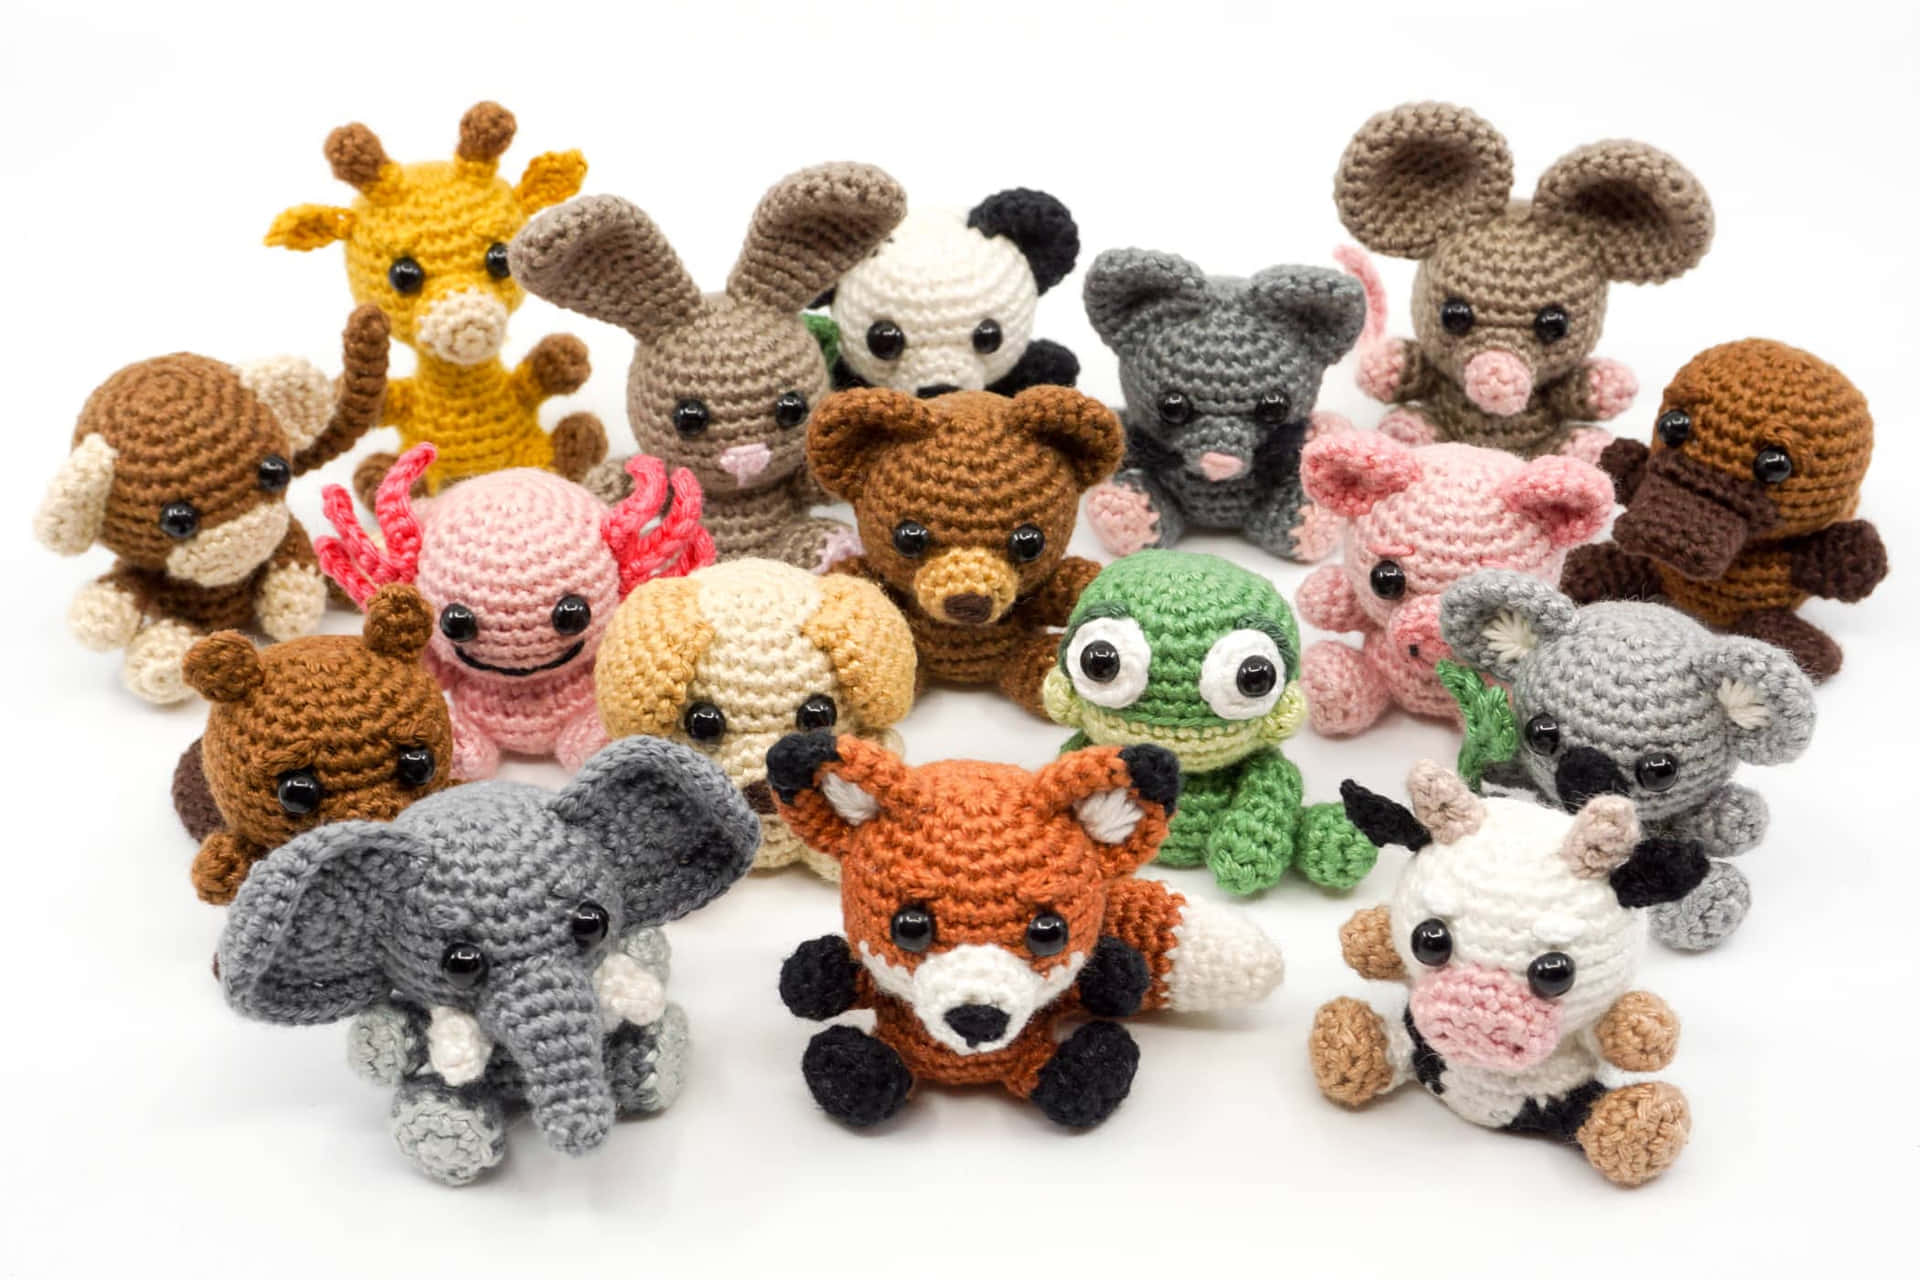 A Group Of Crocheted Animals Arranged In A Circle